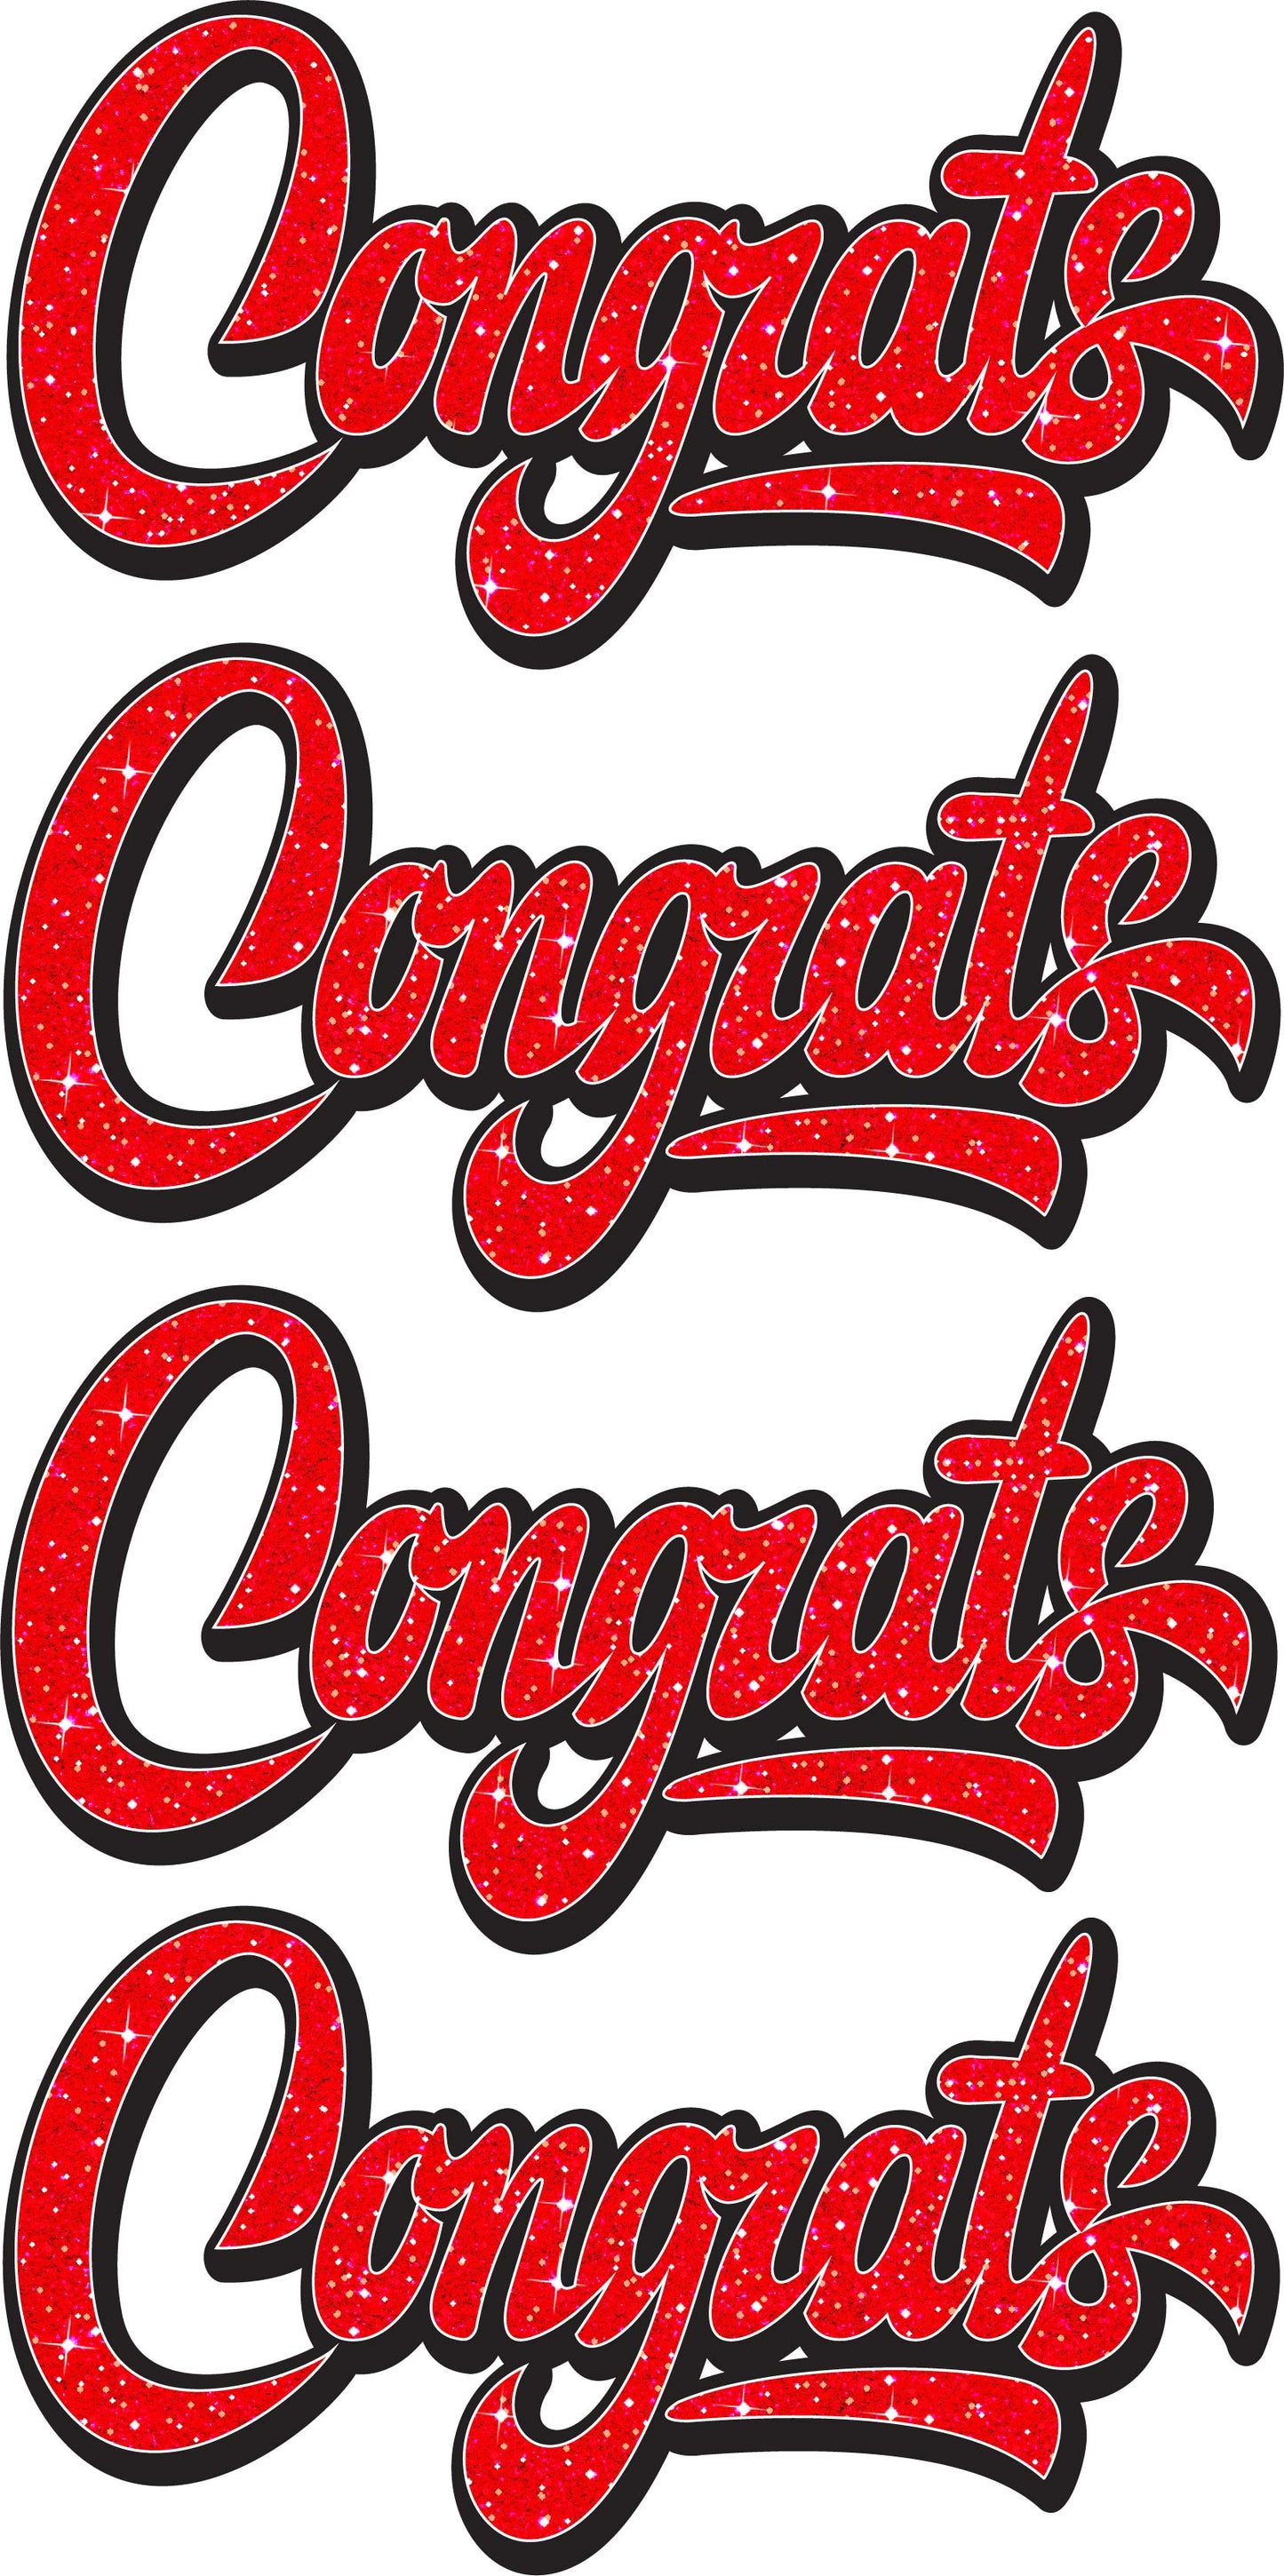 Congrats x 4 on a Sheet Graduation - Sparkly Red Glitter